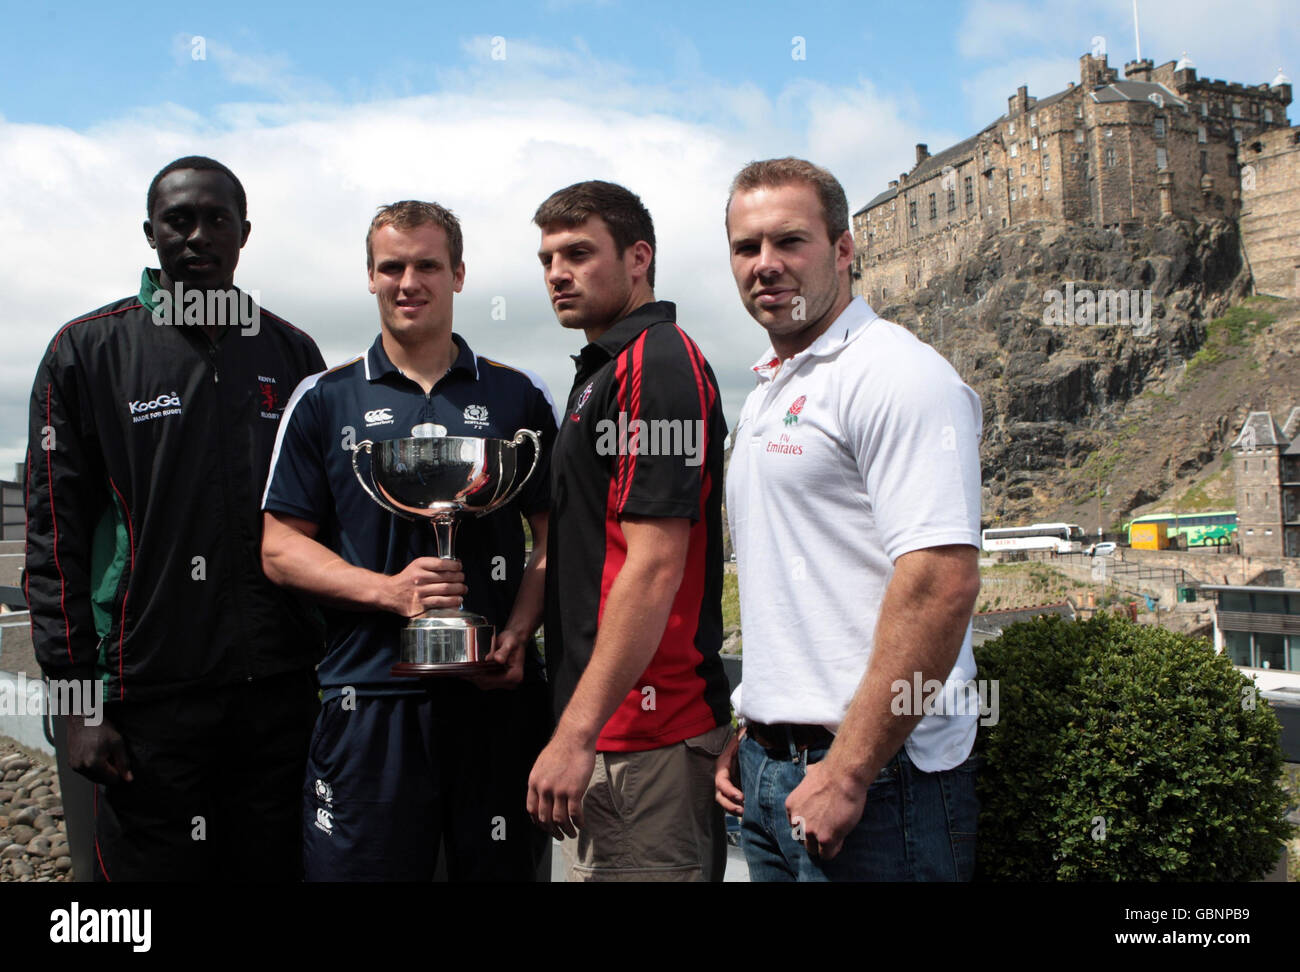 Team Captains; Kenya's Humphrey Kayange, Scotland's Scott Forrest, Canada's Neil Meecham and England's Ollie Phillips (left to right) pose with the 7s Cup Trophy during an Emirates Airline Edinburgh 7s Festival photocall in Edinburgh, Scotland. Stock Photo